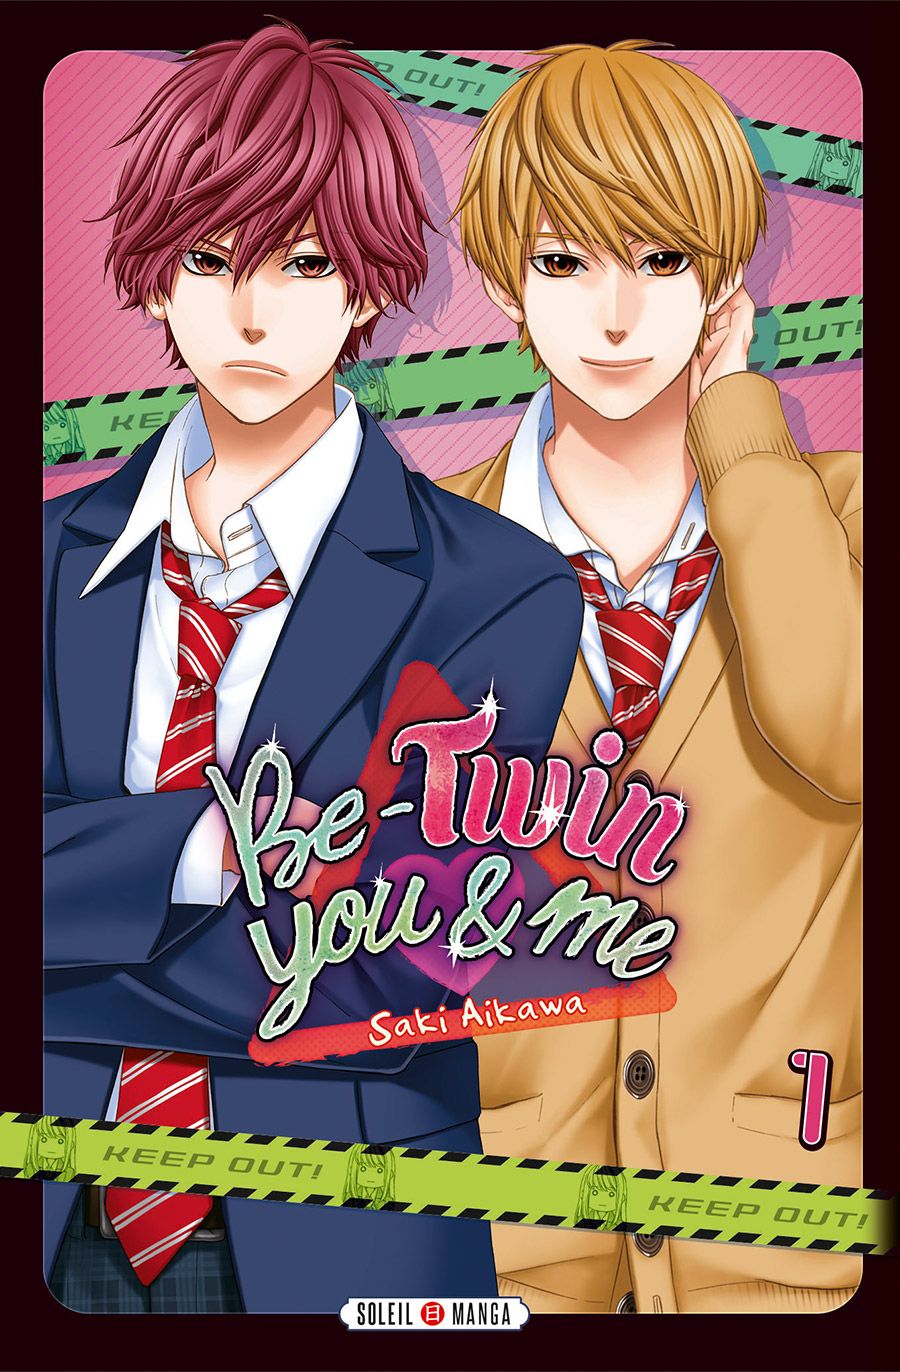 Be-Twin you & me 1